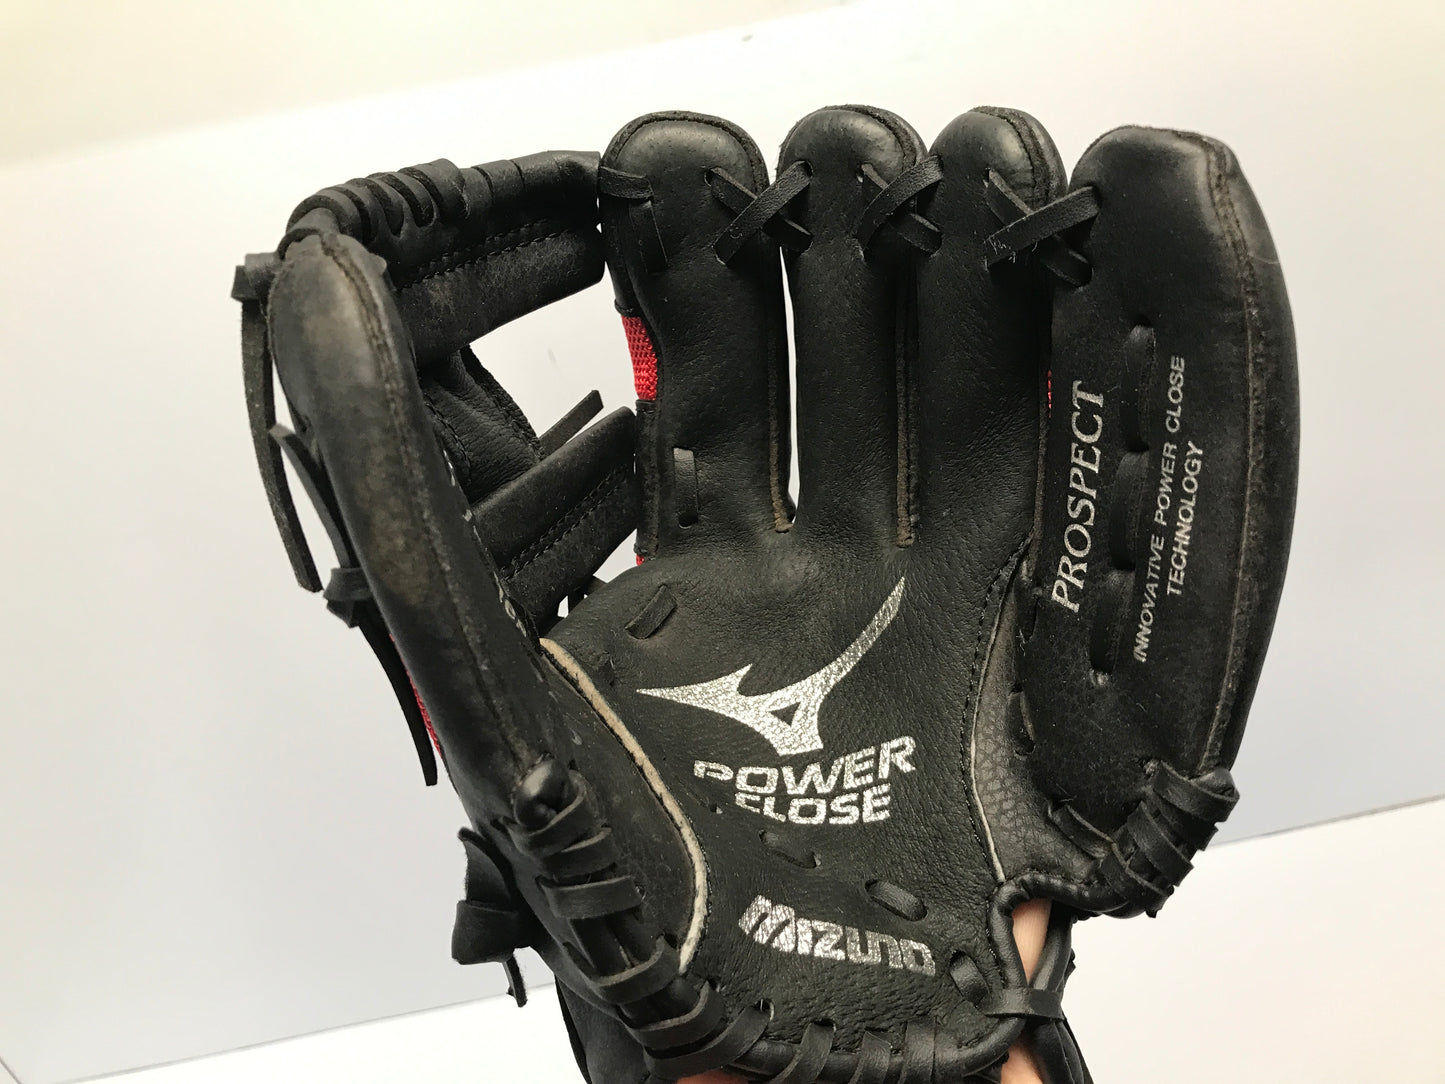 Baseball Glove Child Size 10 inch Mizuno Black Red Leather Fits Left Hand Like New